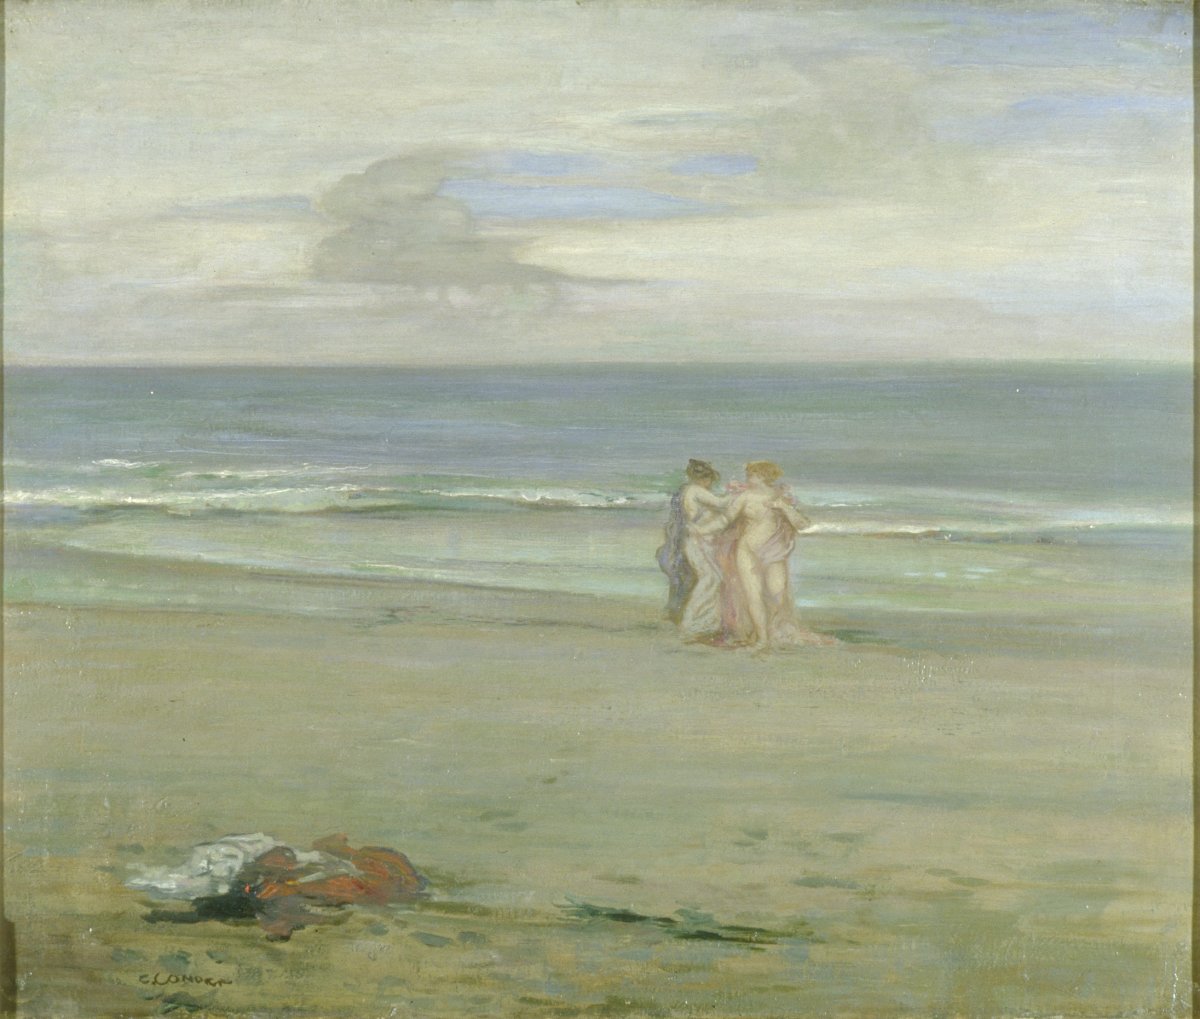 Image of Figures on a Beach